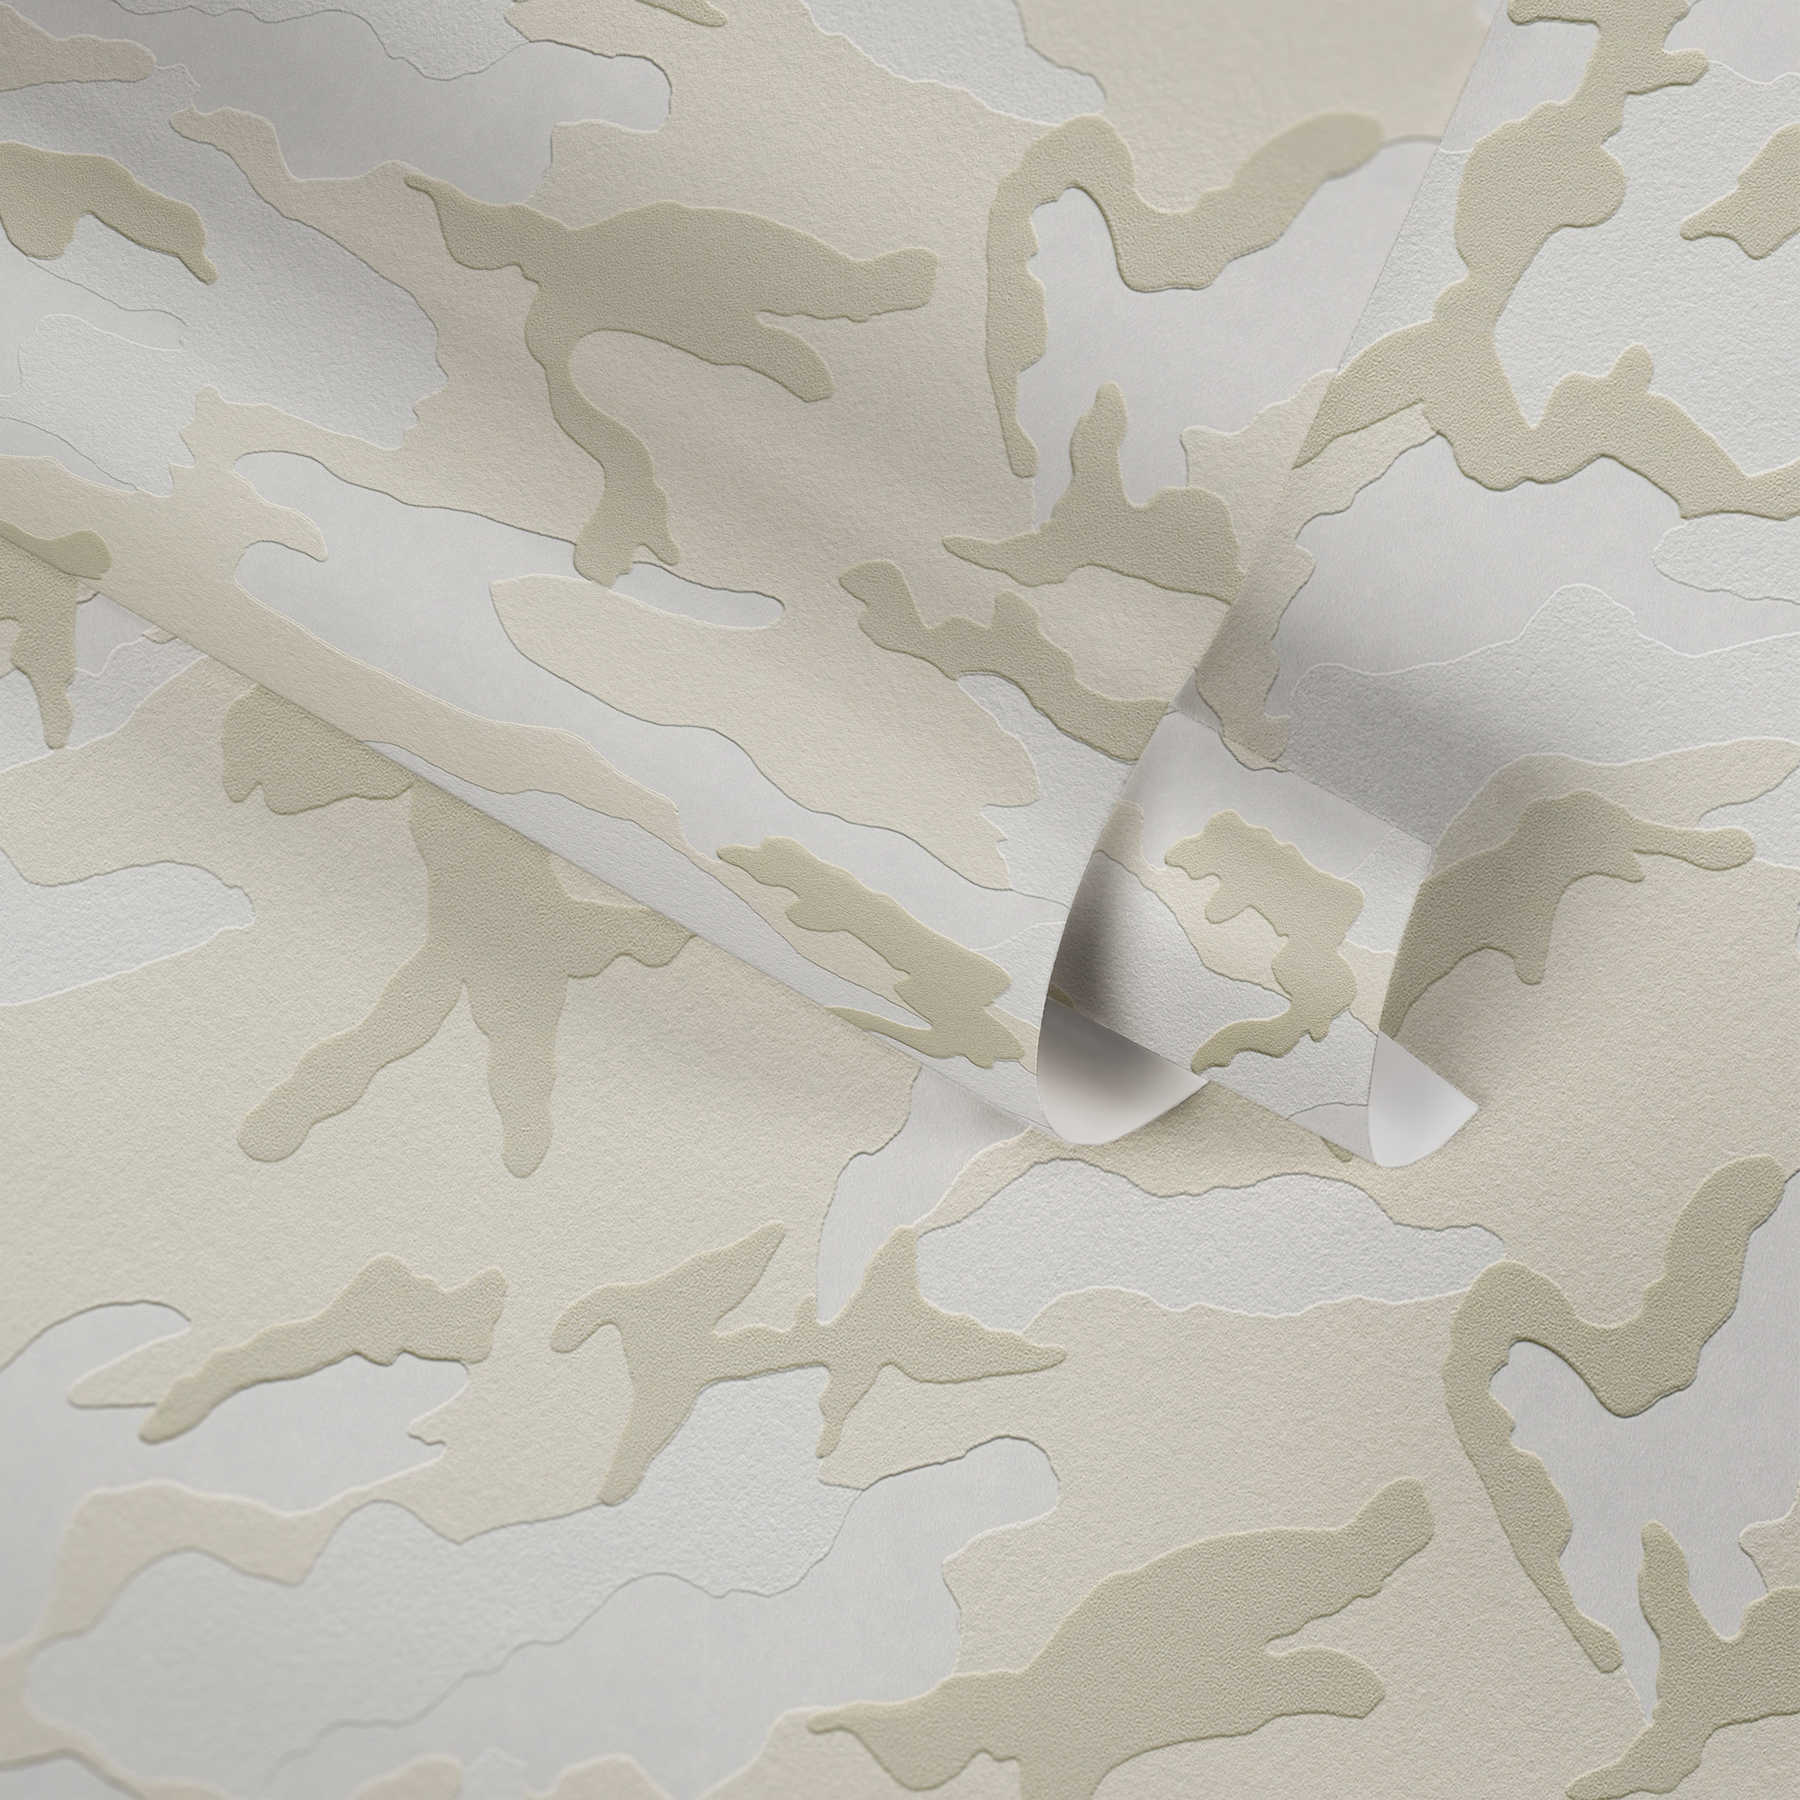             Camouflage pattern wallpaper snow, camouflage non-woven wallpaper - grey, cream
        